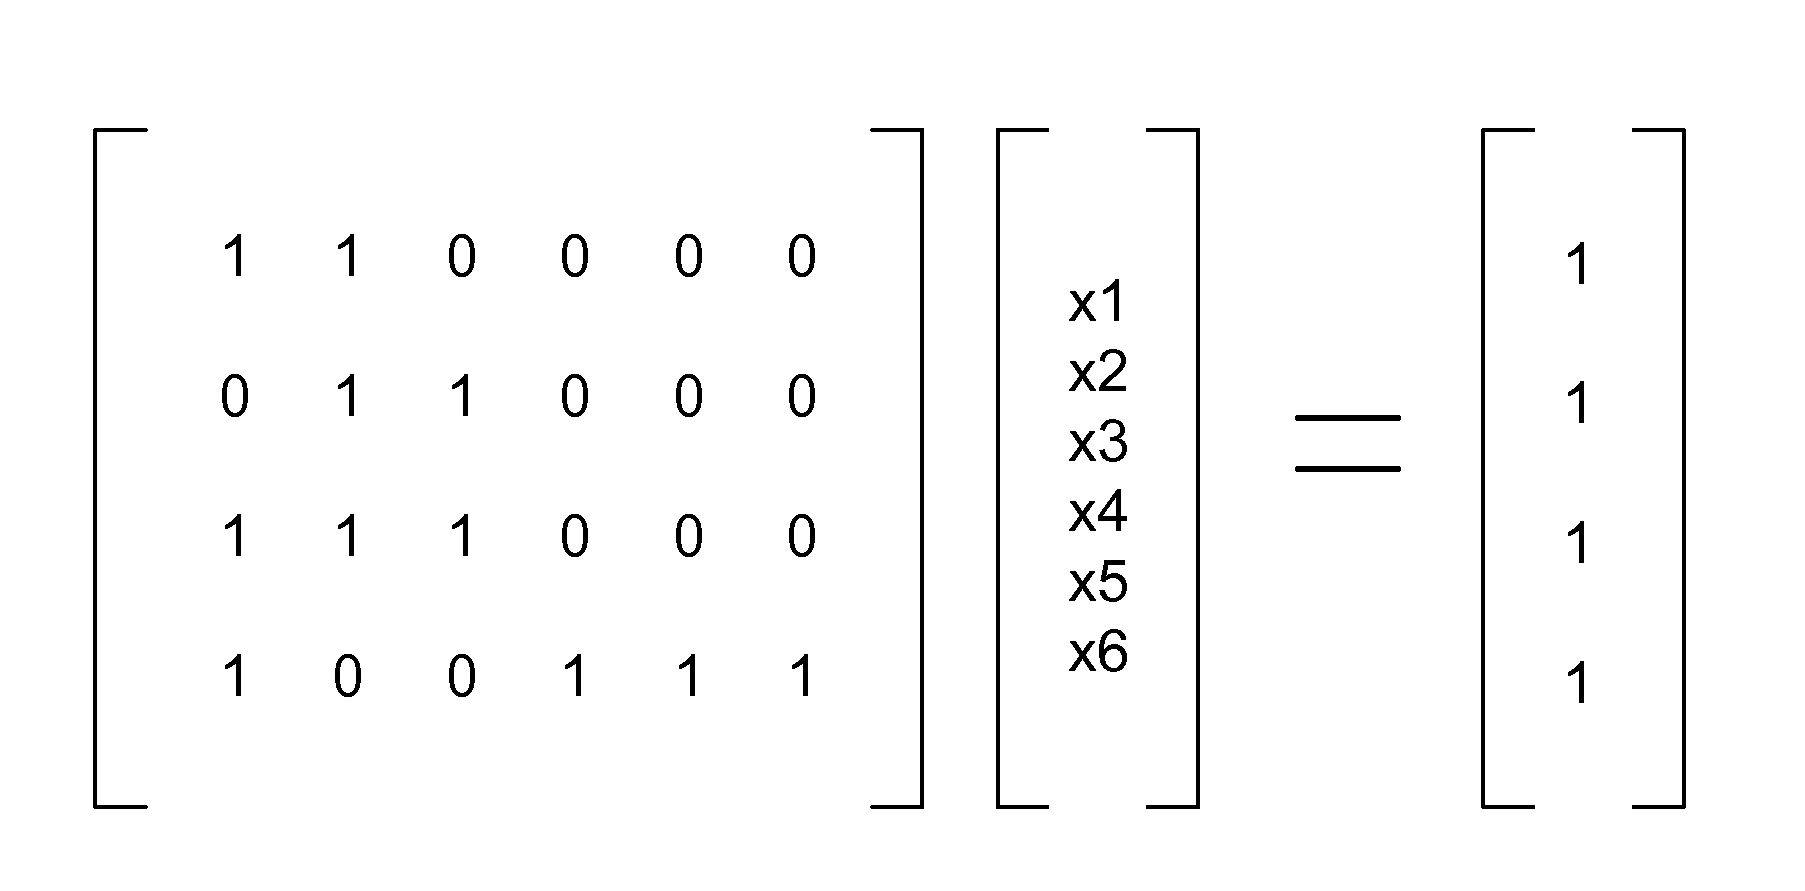 Low-complexity flash memory data-encoding techniques using simplified belief propagation